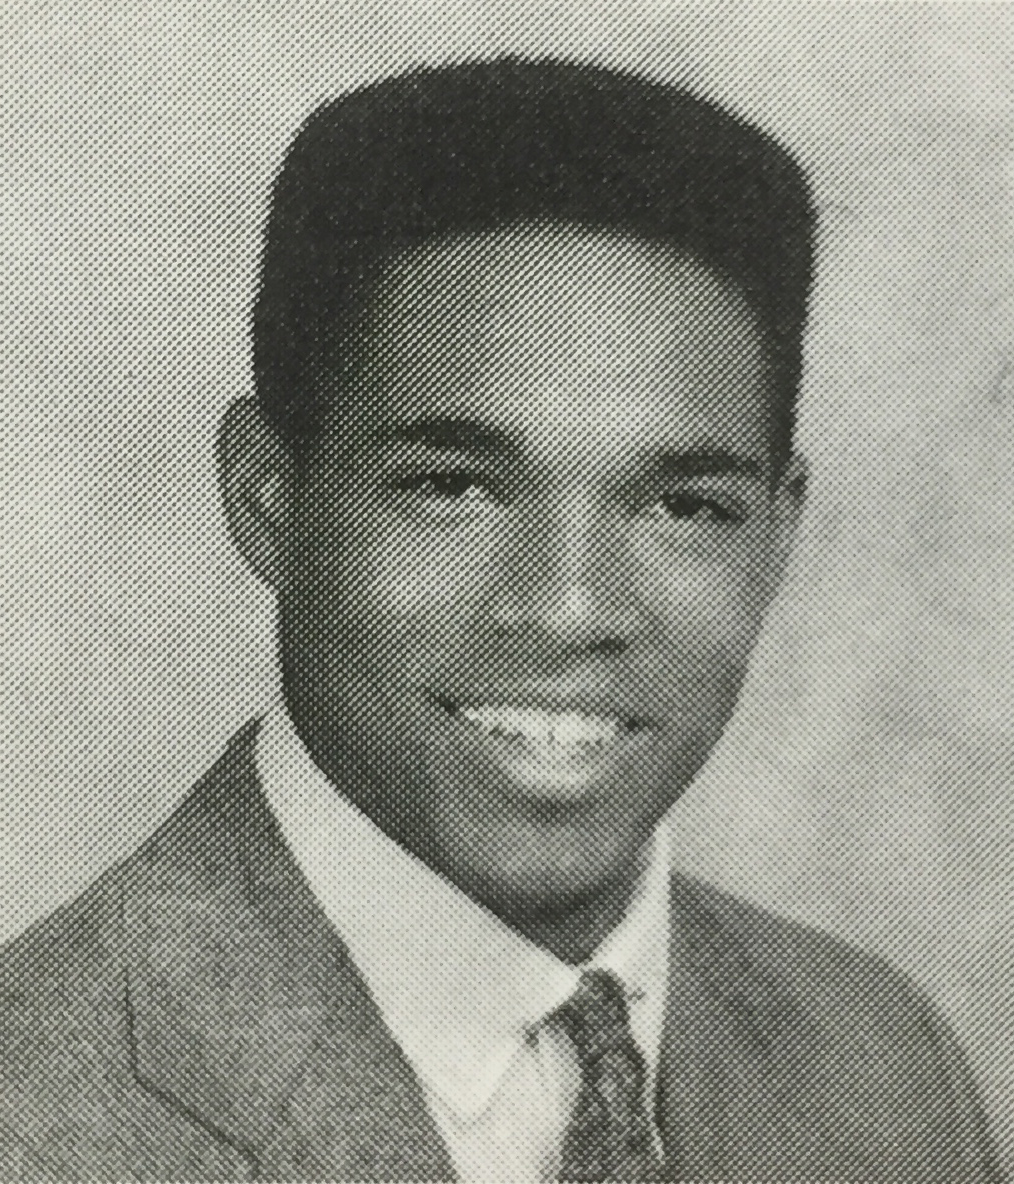 During his time on Grounds, George acted in several plays and served as co-chair of resident staff during his fourth year.